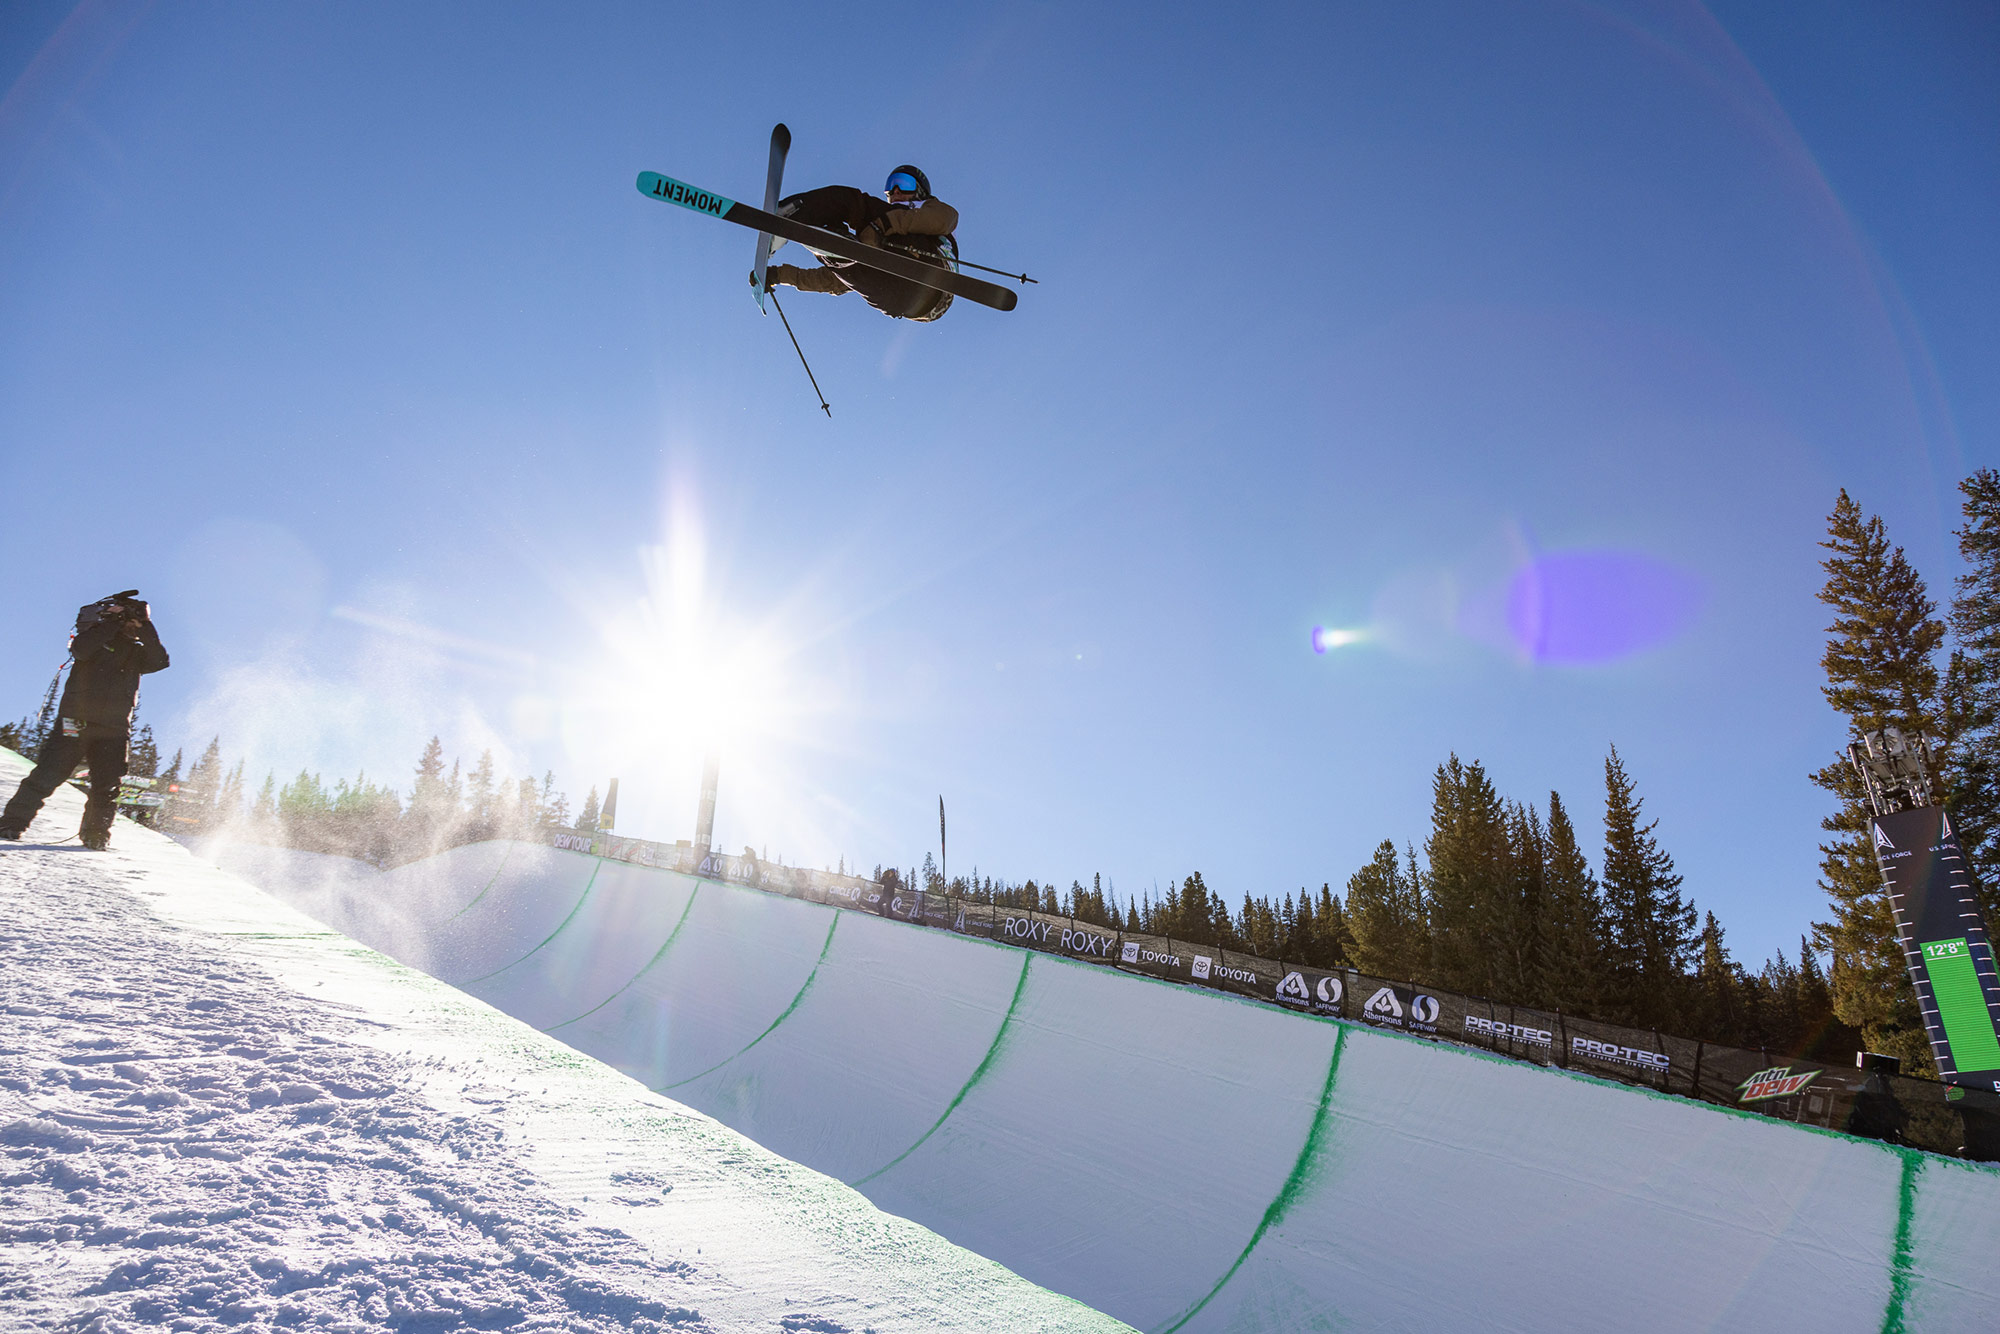 David Wise competes in mens finals at the 2021 Dew Tour ski halfpipe.